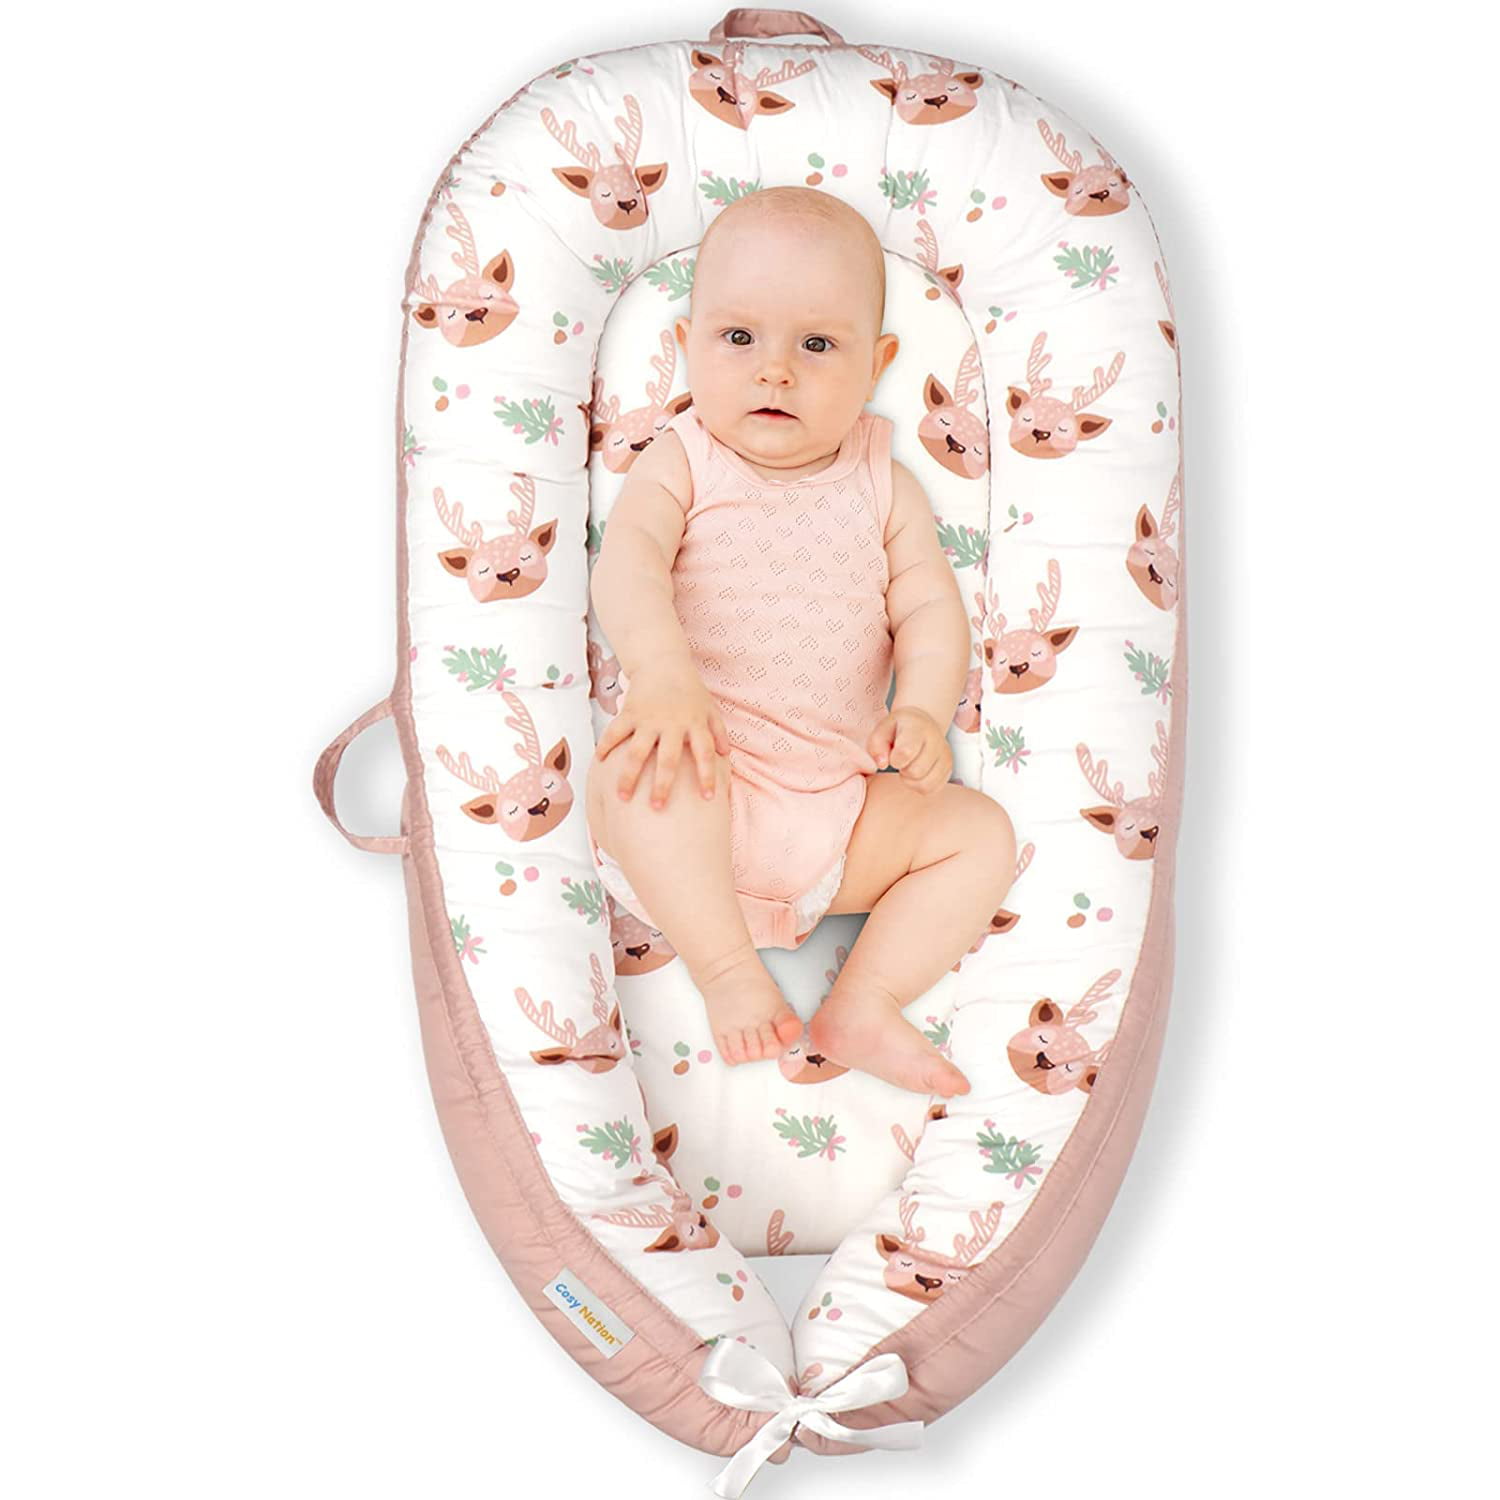 Super Soft Portable Baby Lounger Newborn Infant Bassinet Perfect for Cuddling Lounging 4-Pieces Double Sided 